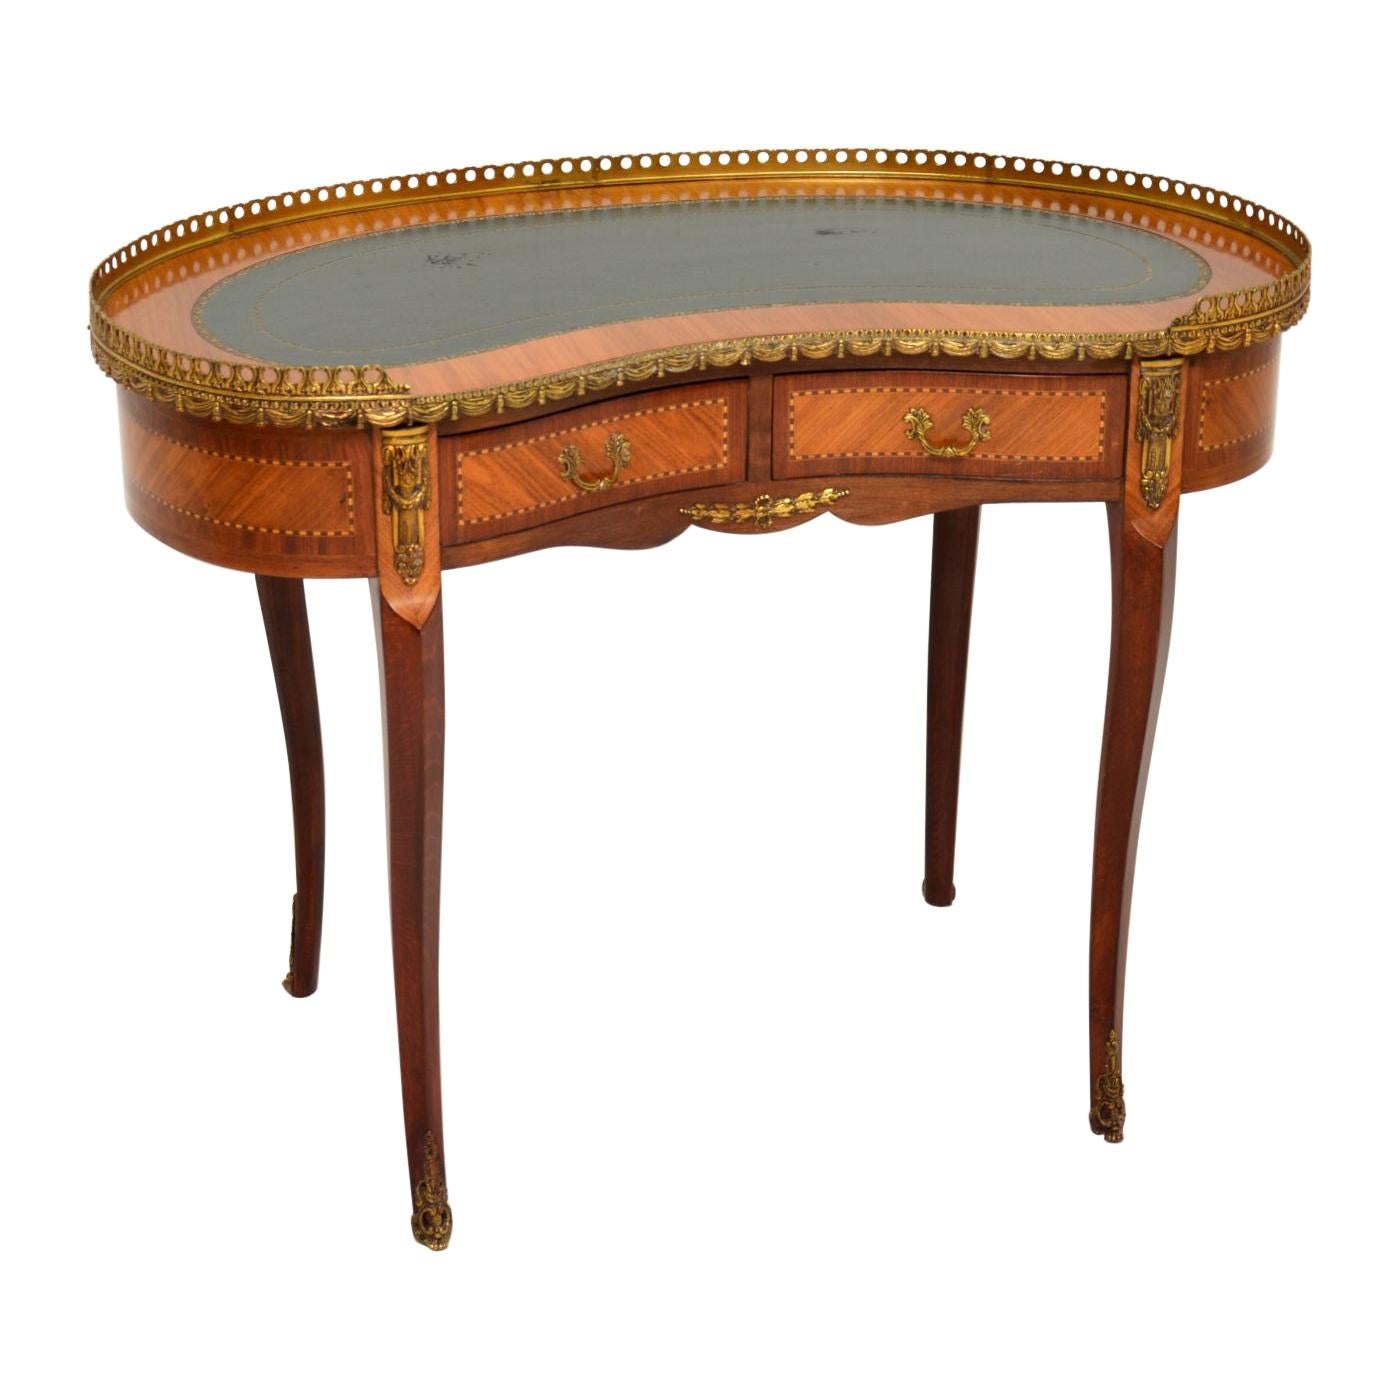 Antique French Style Kidney Shaped Desk